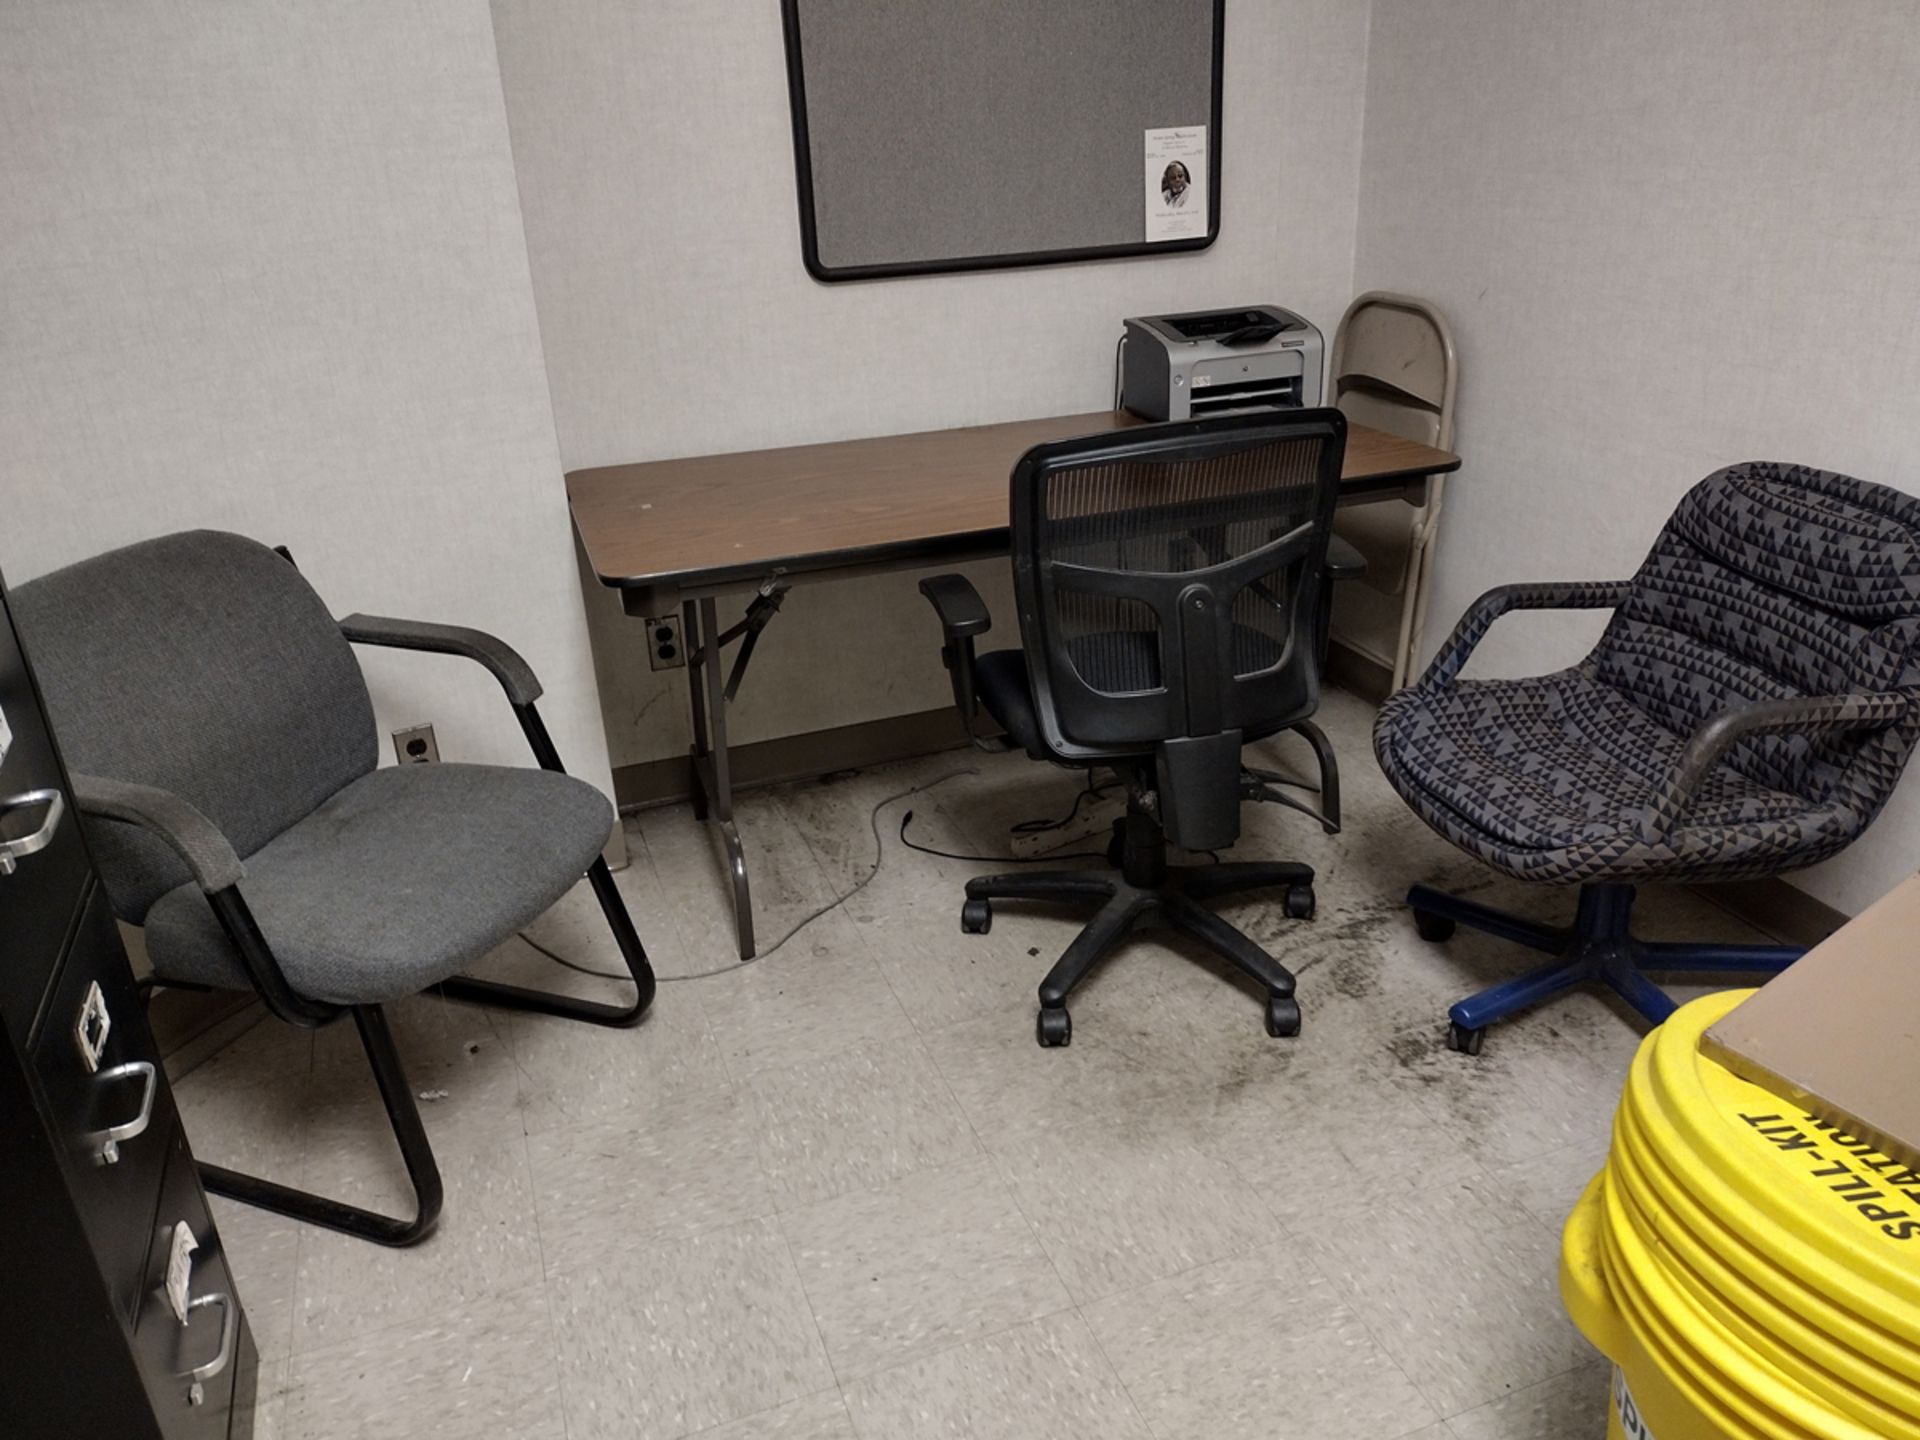 Group of Furniture Throughout Rooms - Image 17 of 17